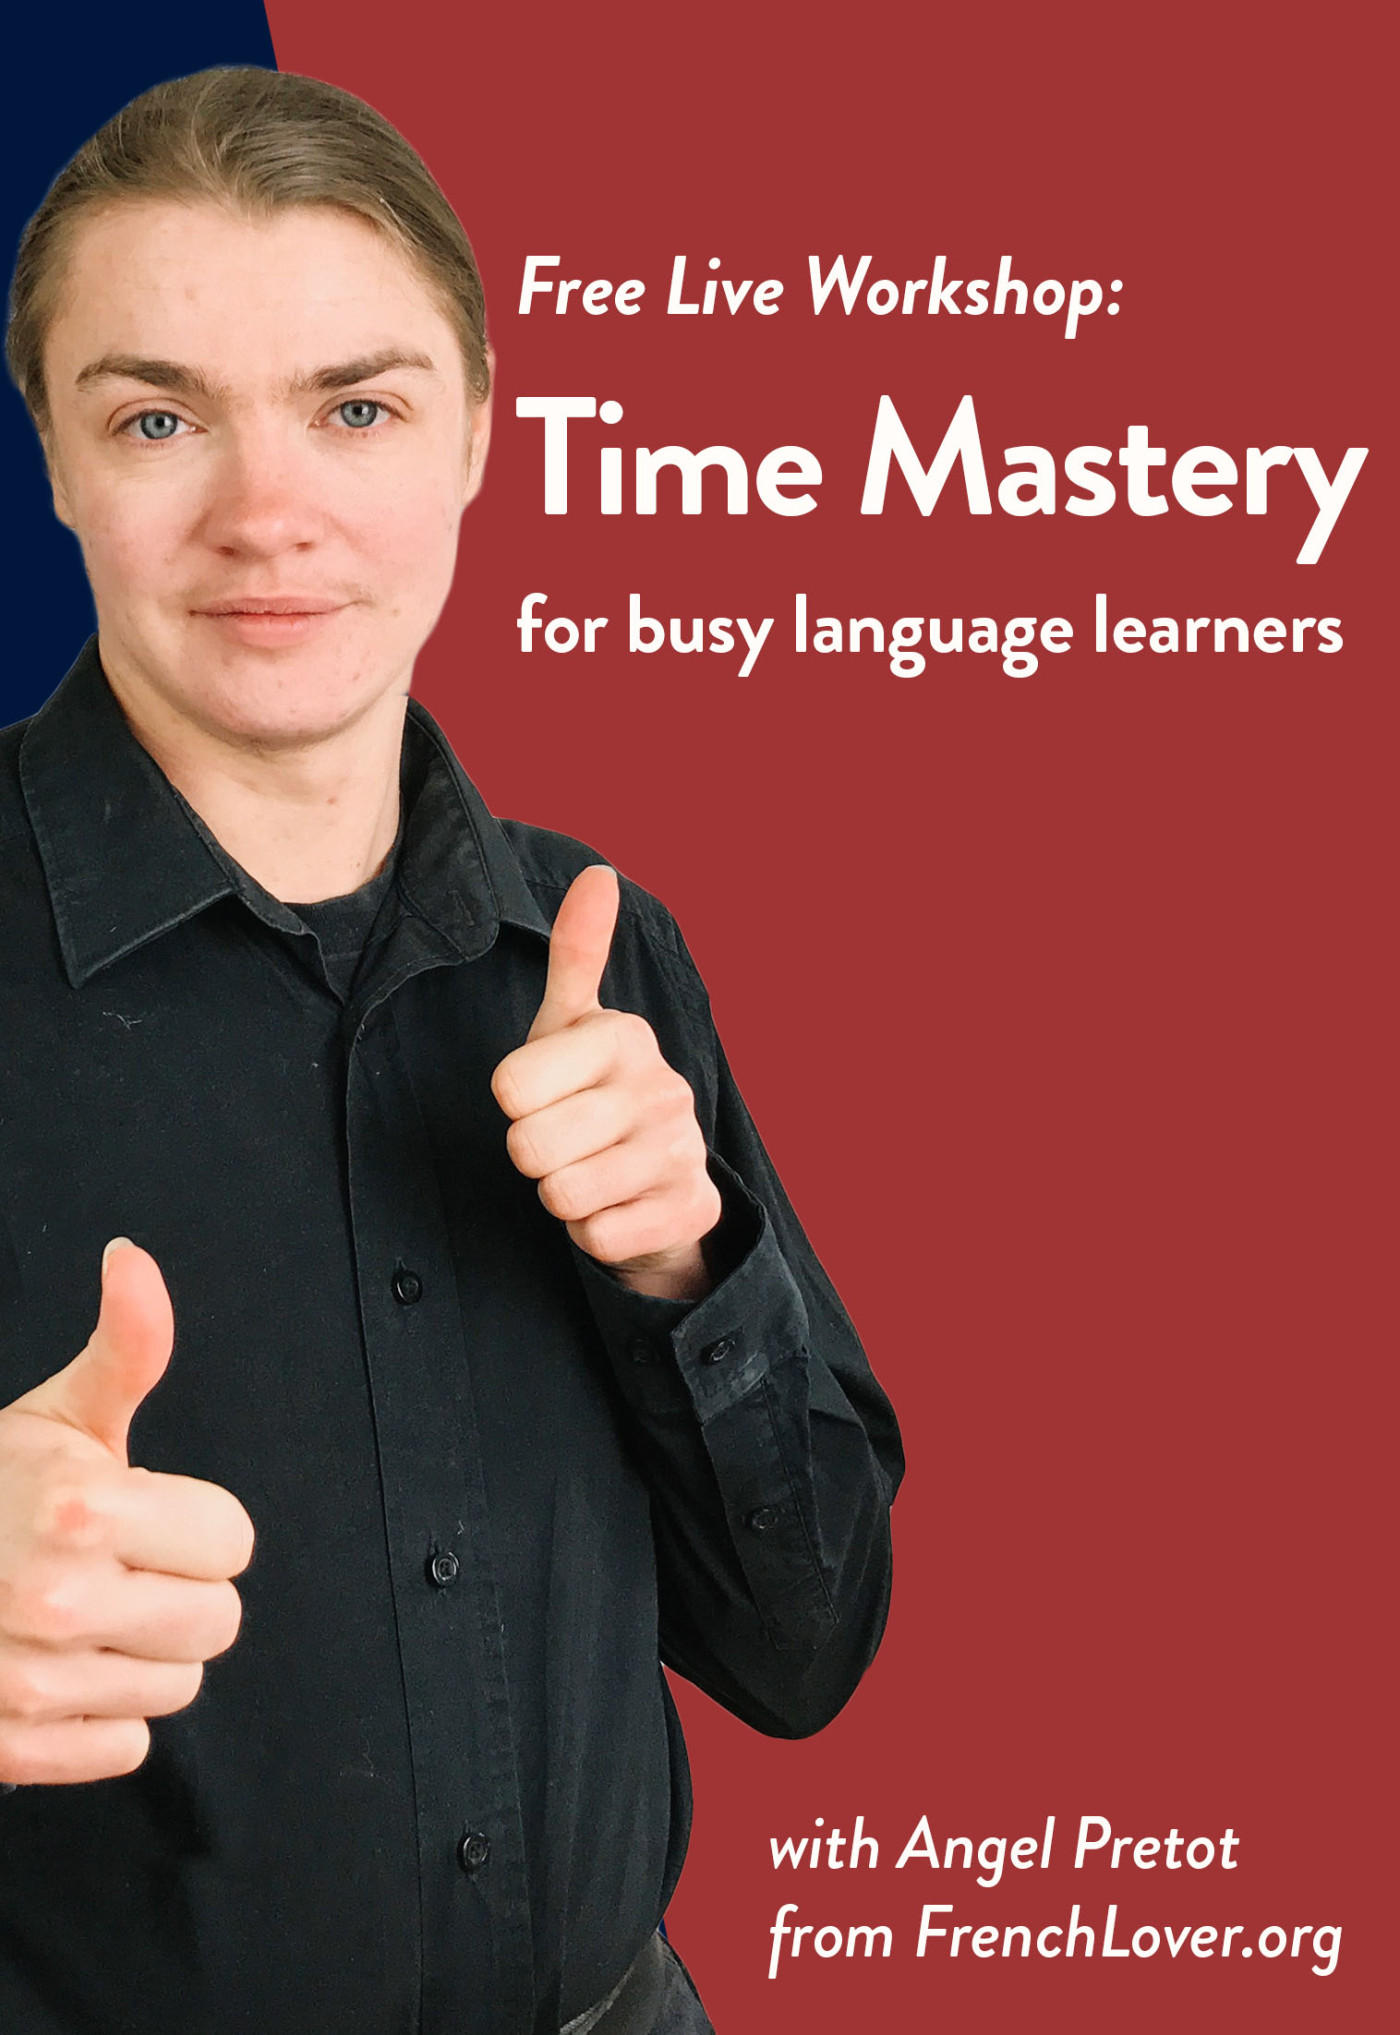 Free Live Workshop: Time Mastery for busy language learners